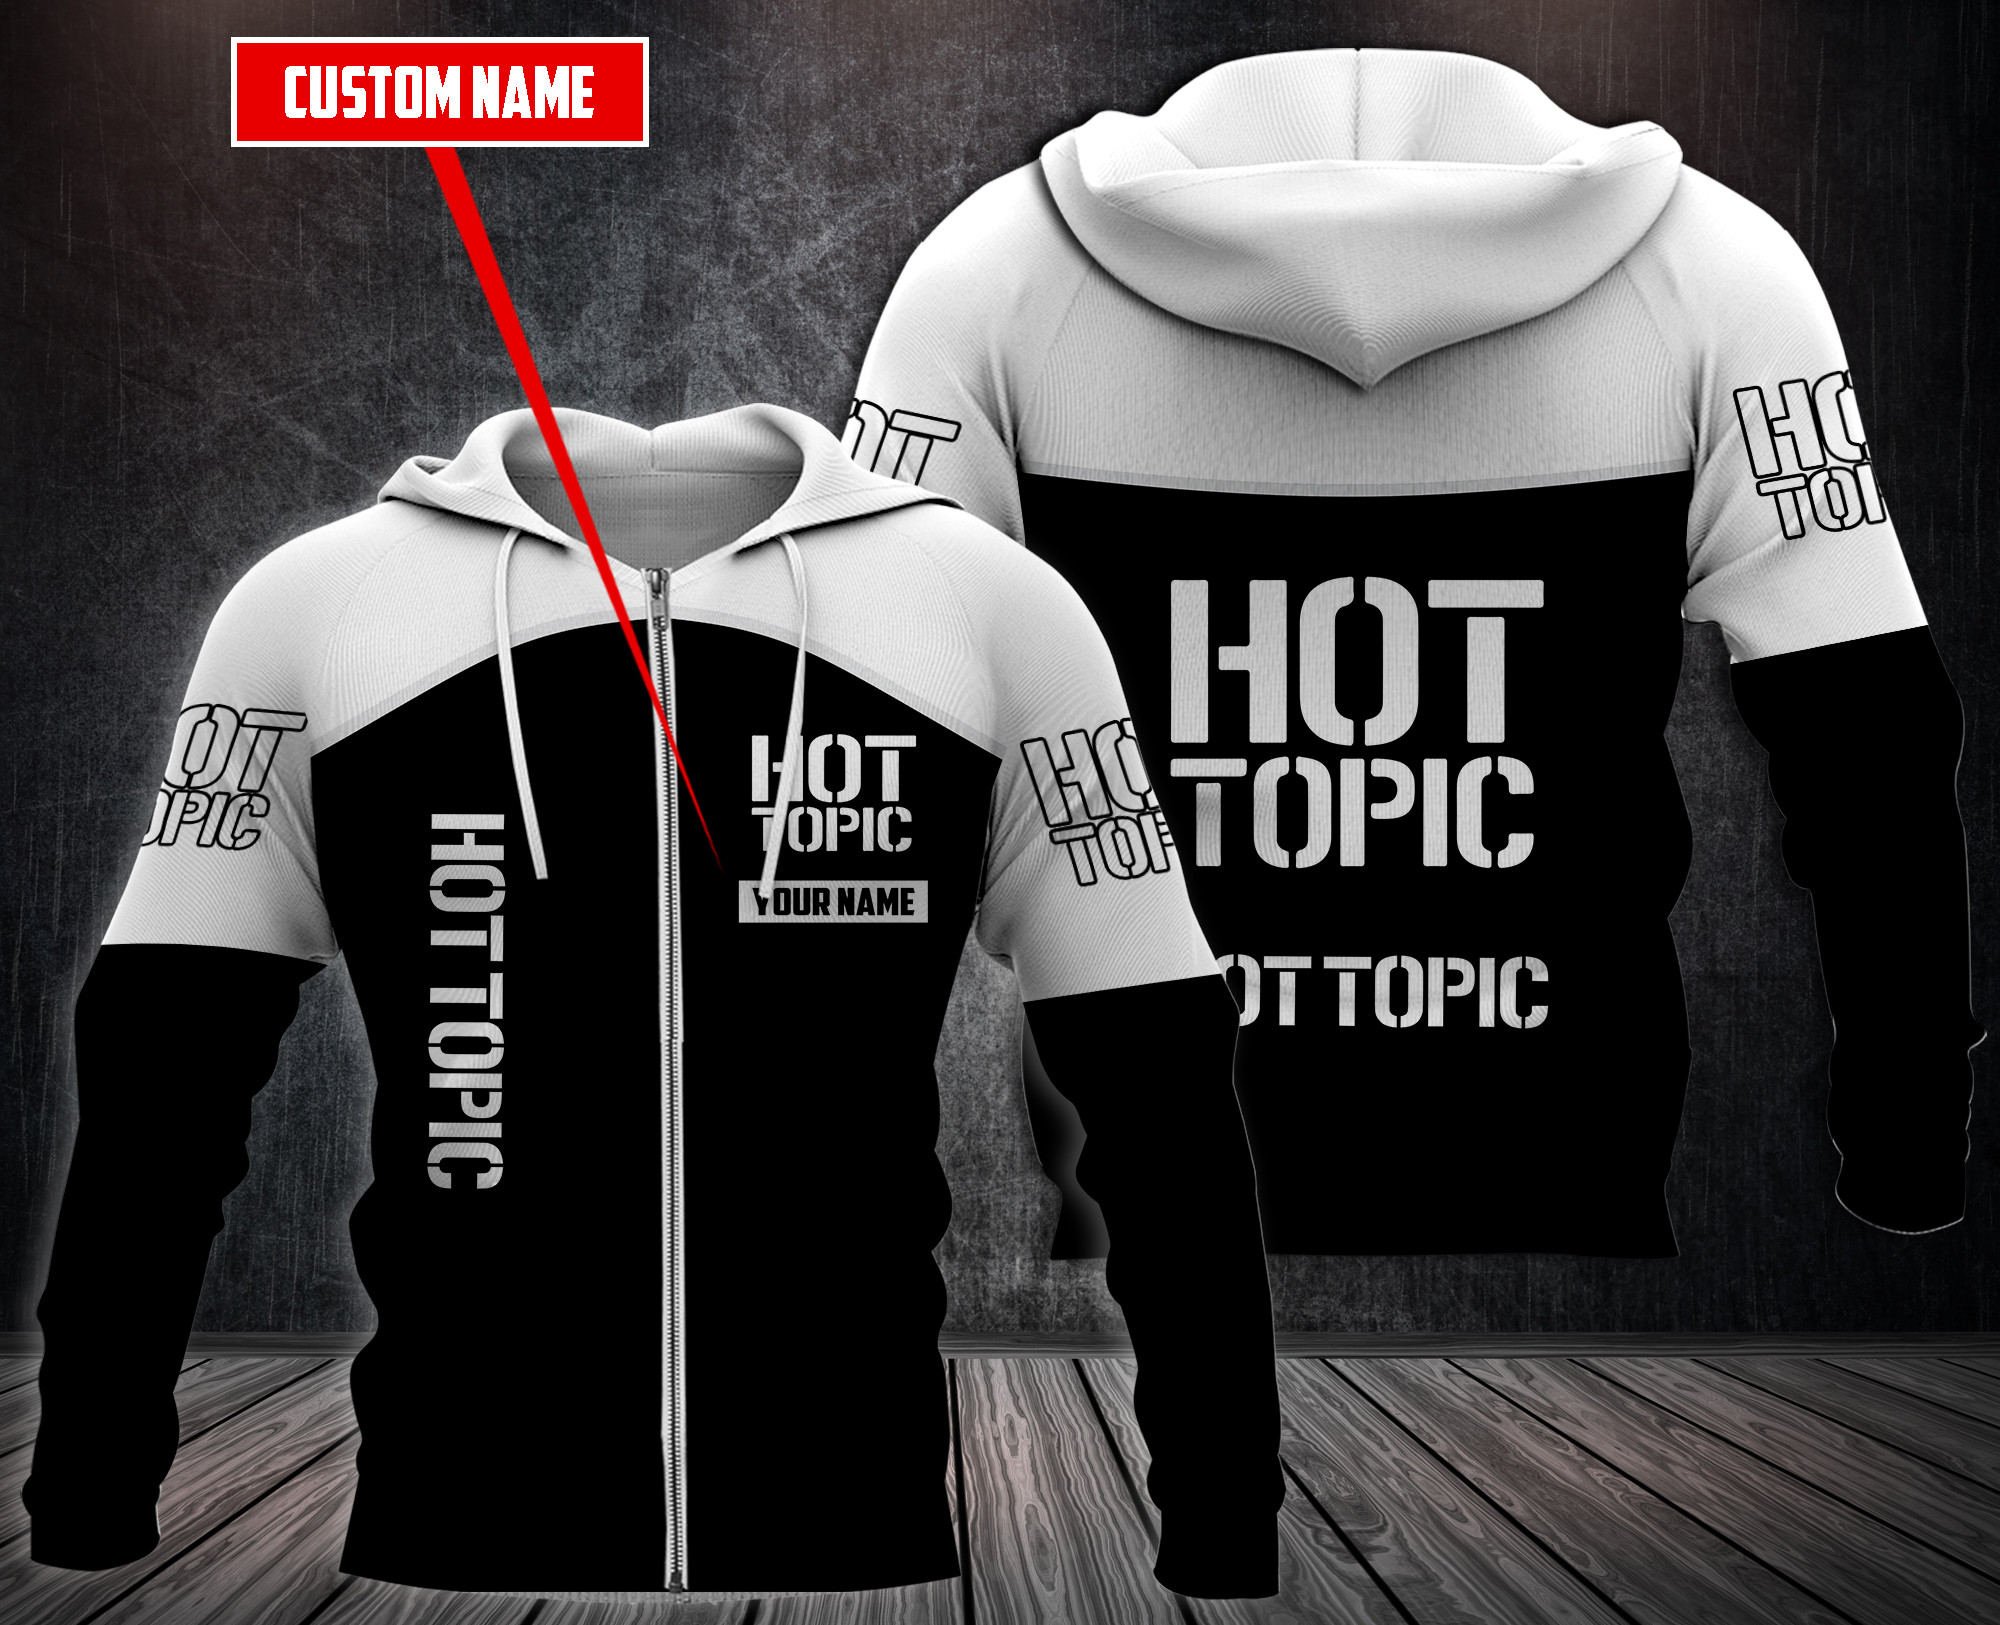 Choose the right hoodies for you on our boxboxshirt and ethershirt websites in 2022 34